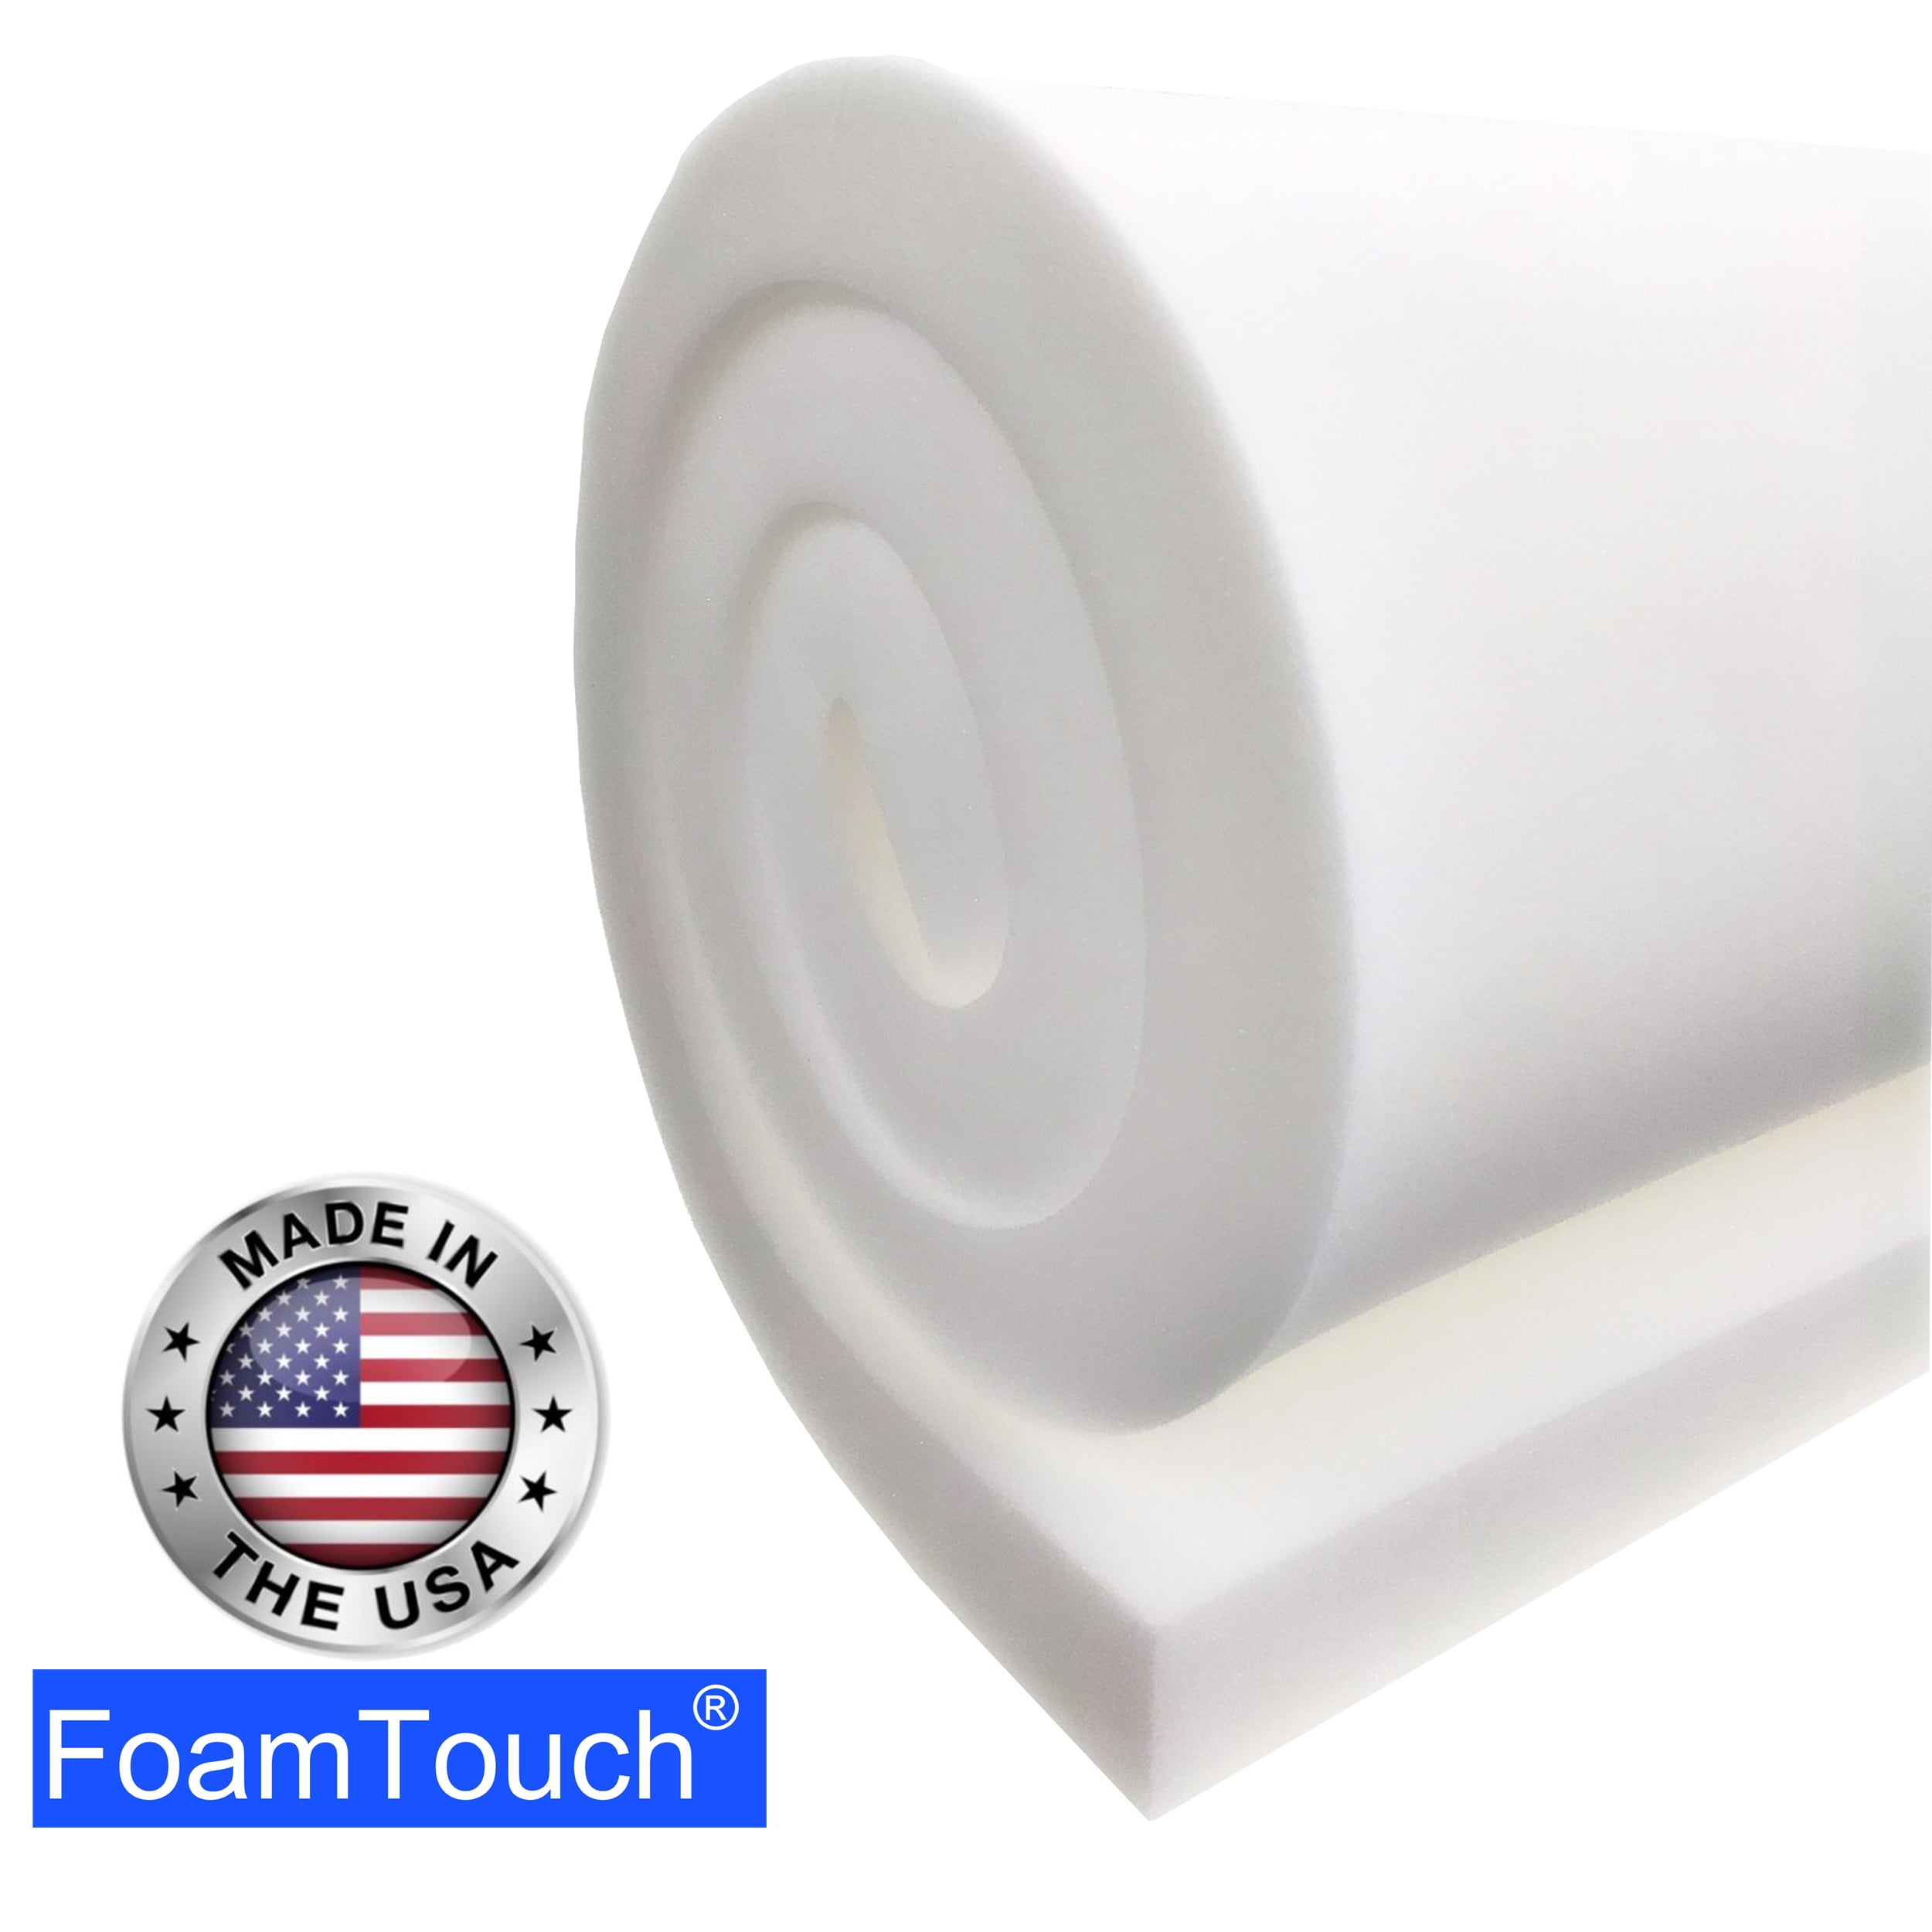 FoamFit High Density Upholstery Foam Cushion 5 Inches Thick 1.8 lb